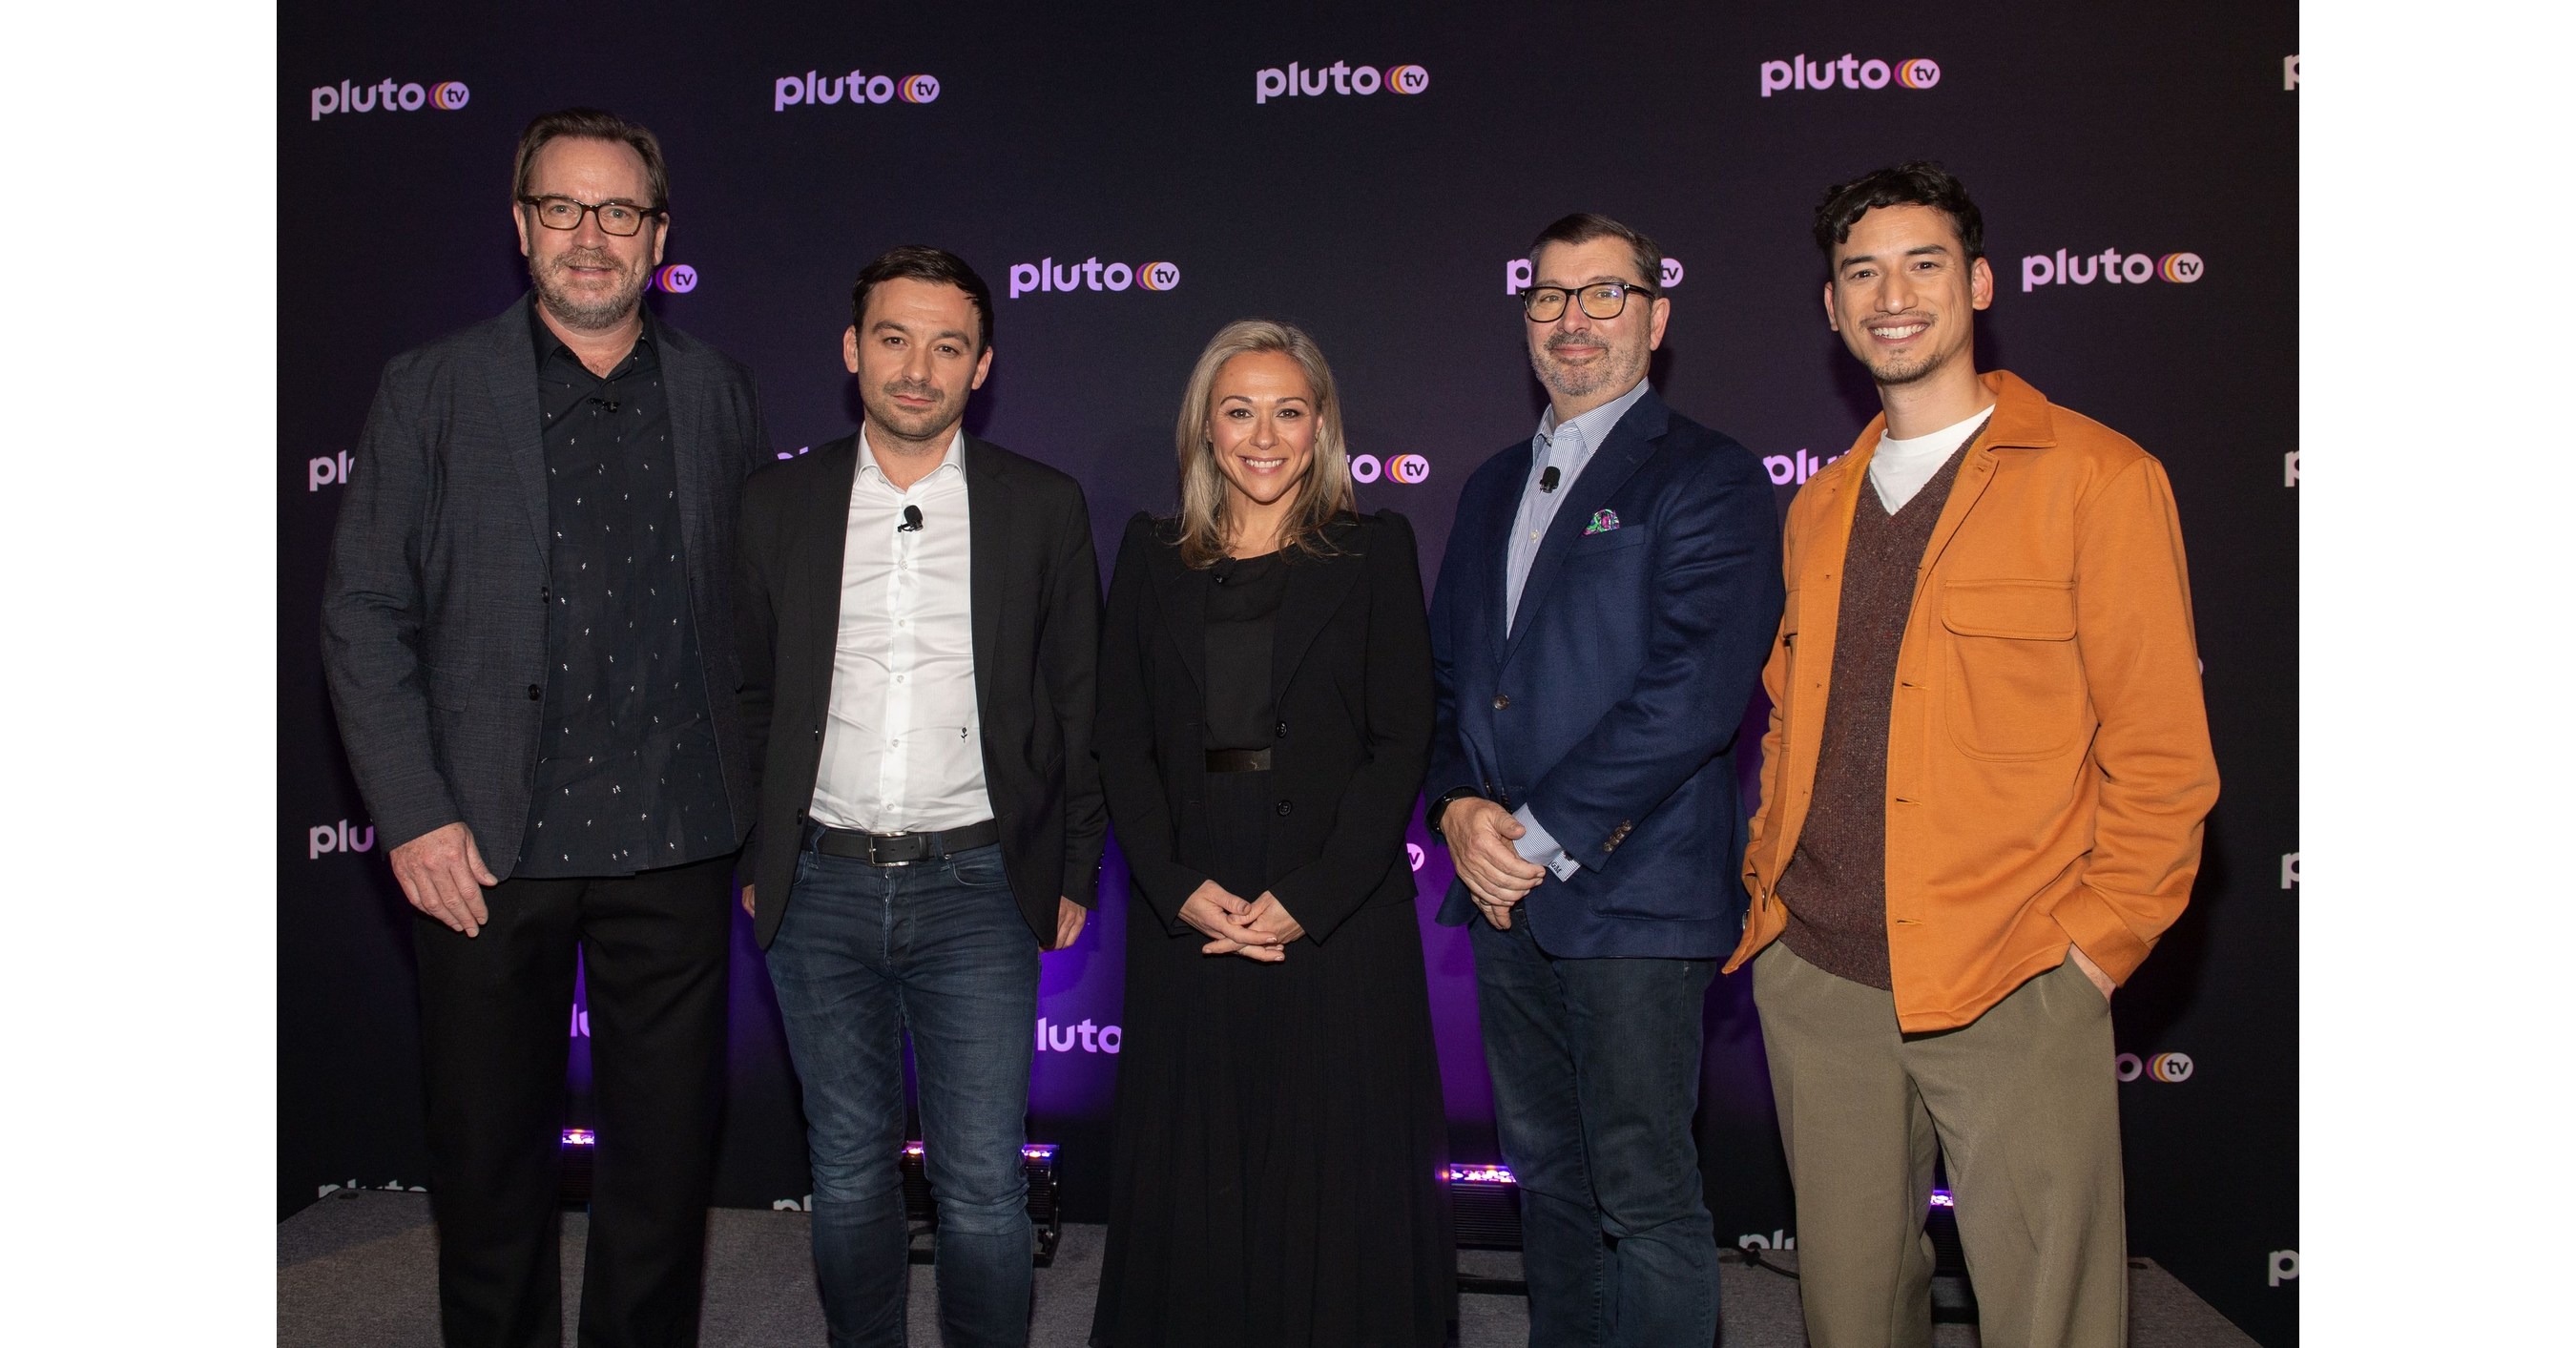 PLUTO TV DEBUTS IN CANADA TODAY WITH MORE THAN 110 UNIQUE FREE CHANNELS